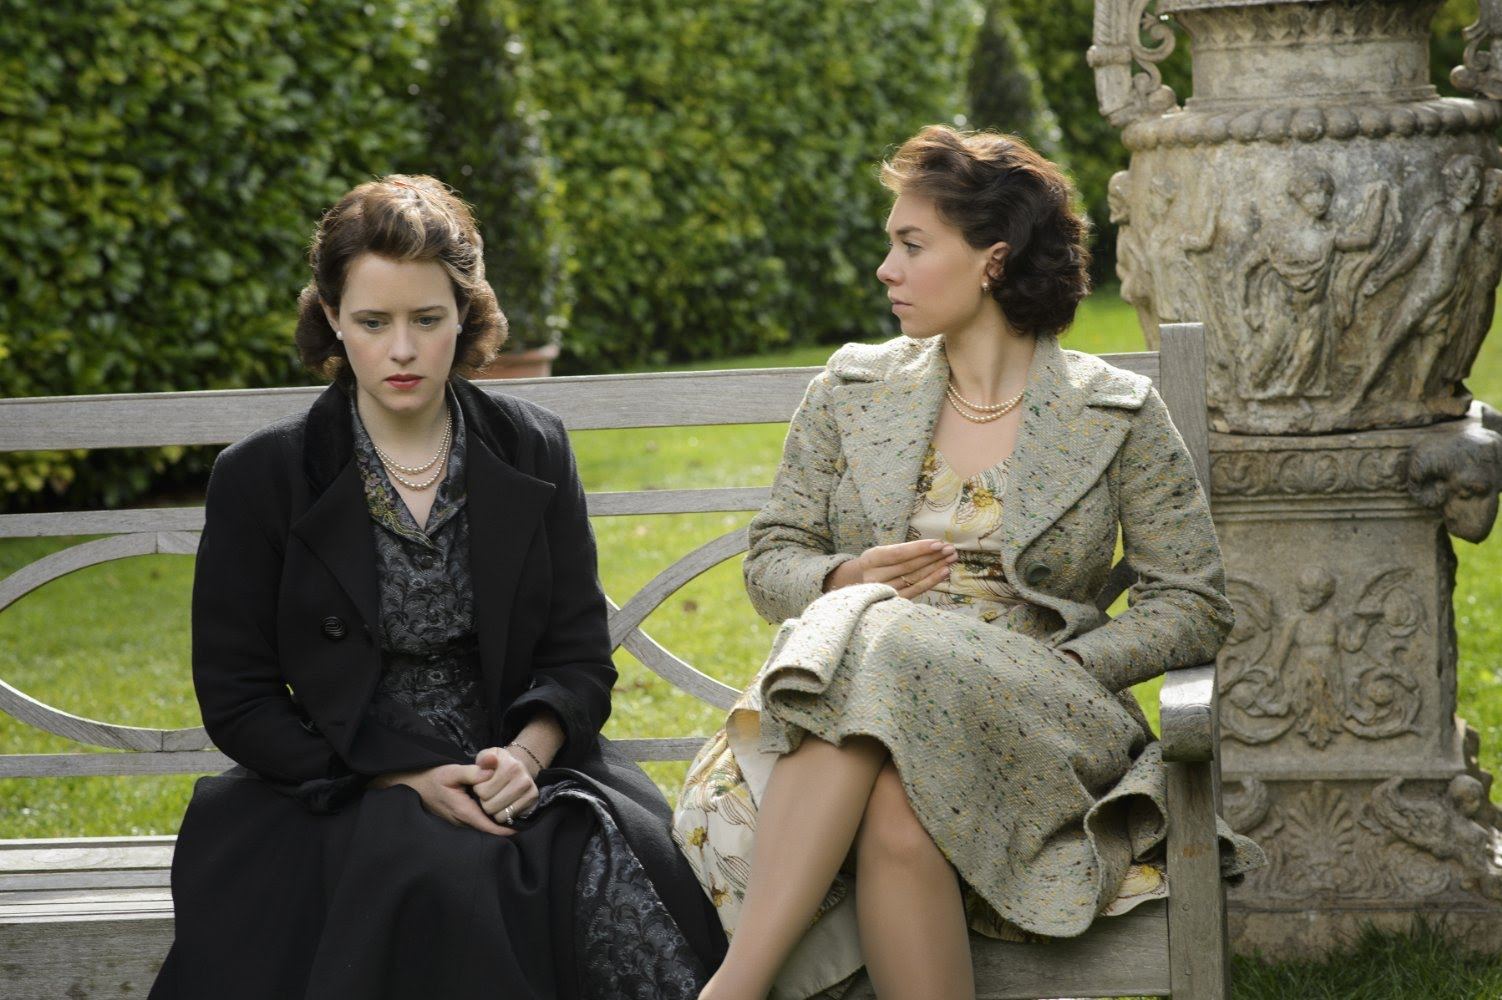 Claire Foy as Princess Elizabeth and Vanessa Kirby as Princess Margaret in The Crown